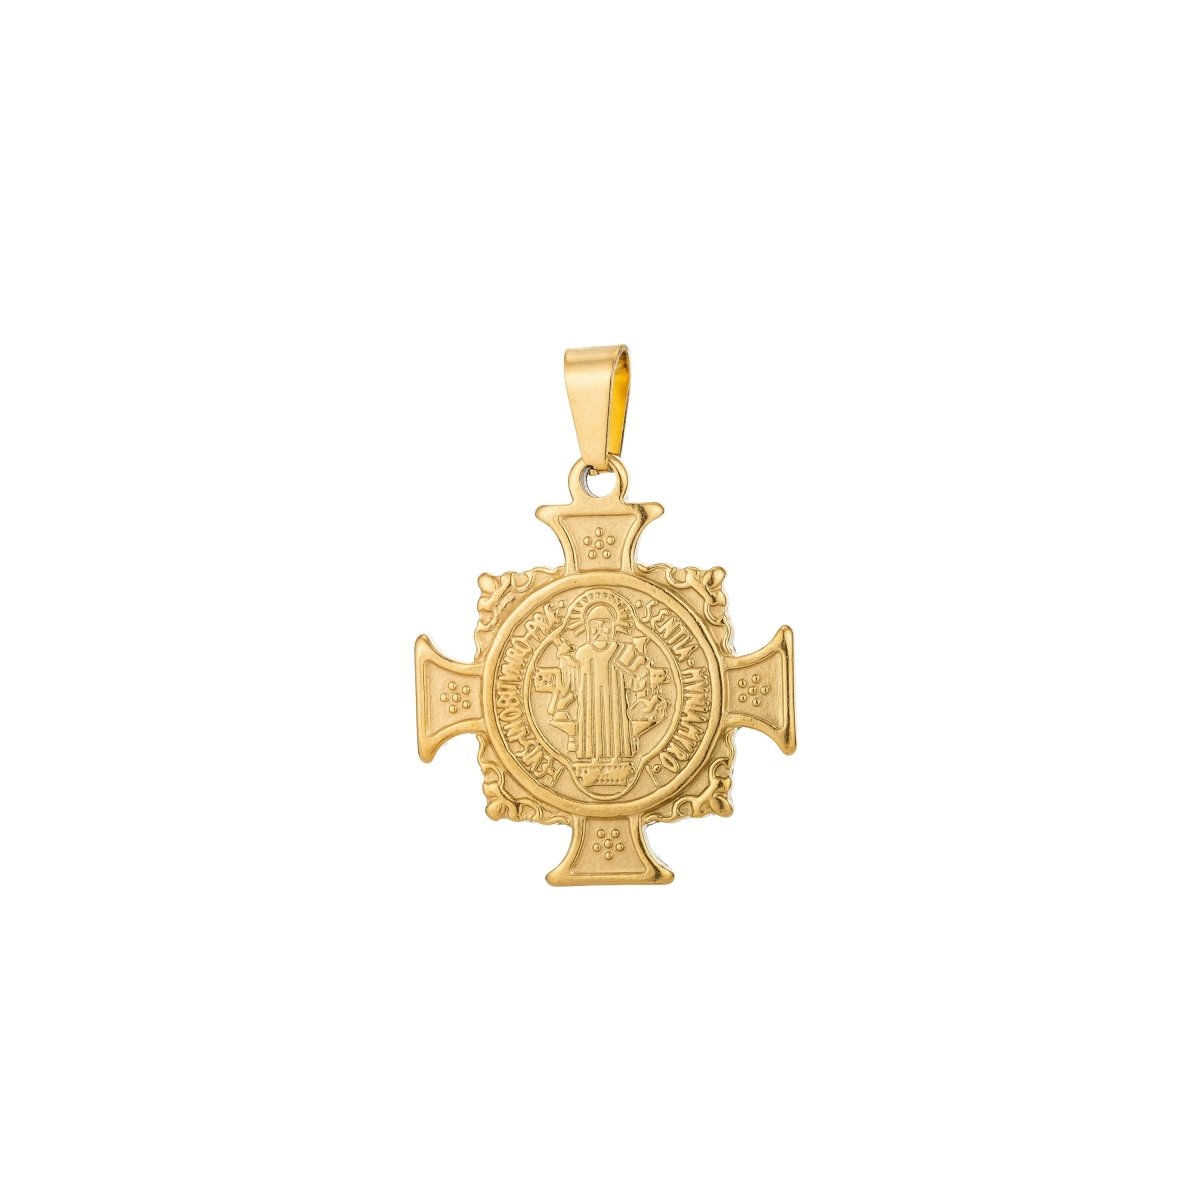 Dainty 18k Gold Filled Saint Benedict Cross Charm Medallion antiquity Pendant Double Sided for Necklace Jewelry Making J-554 J-608 - DLUXCA